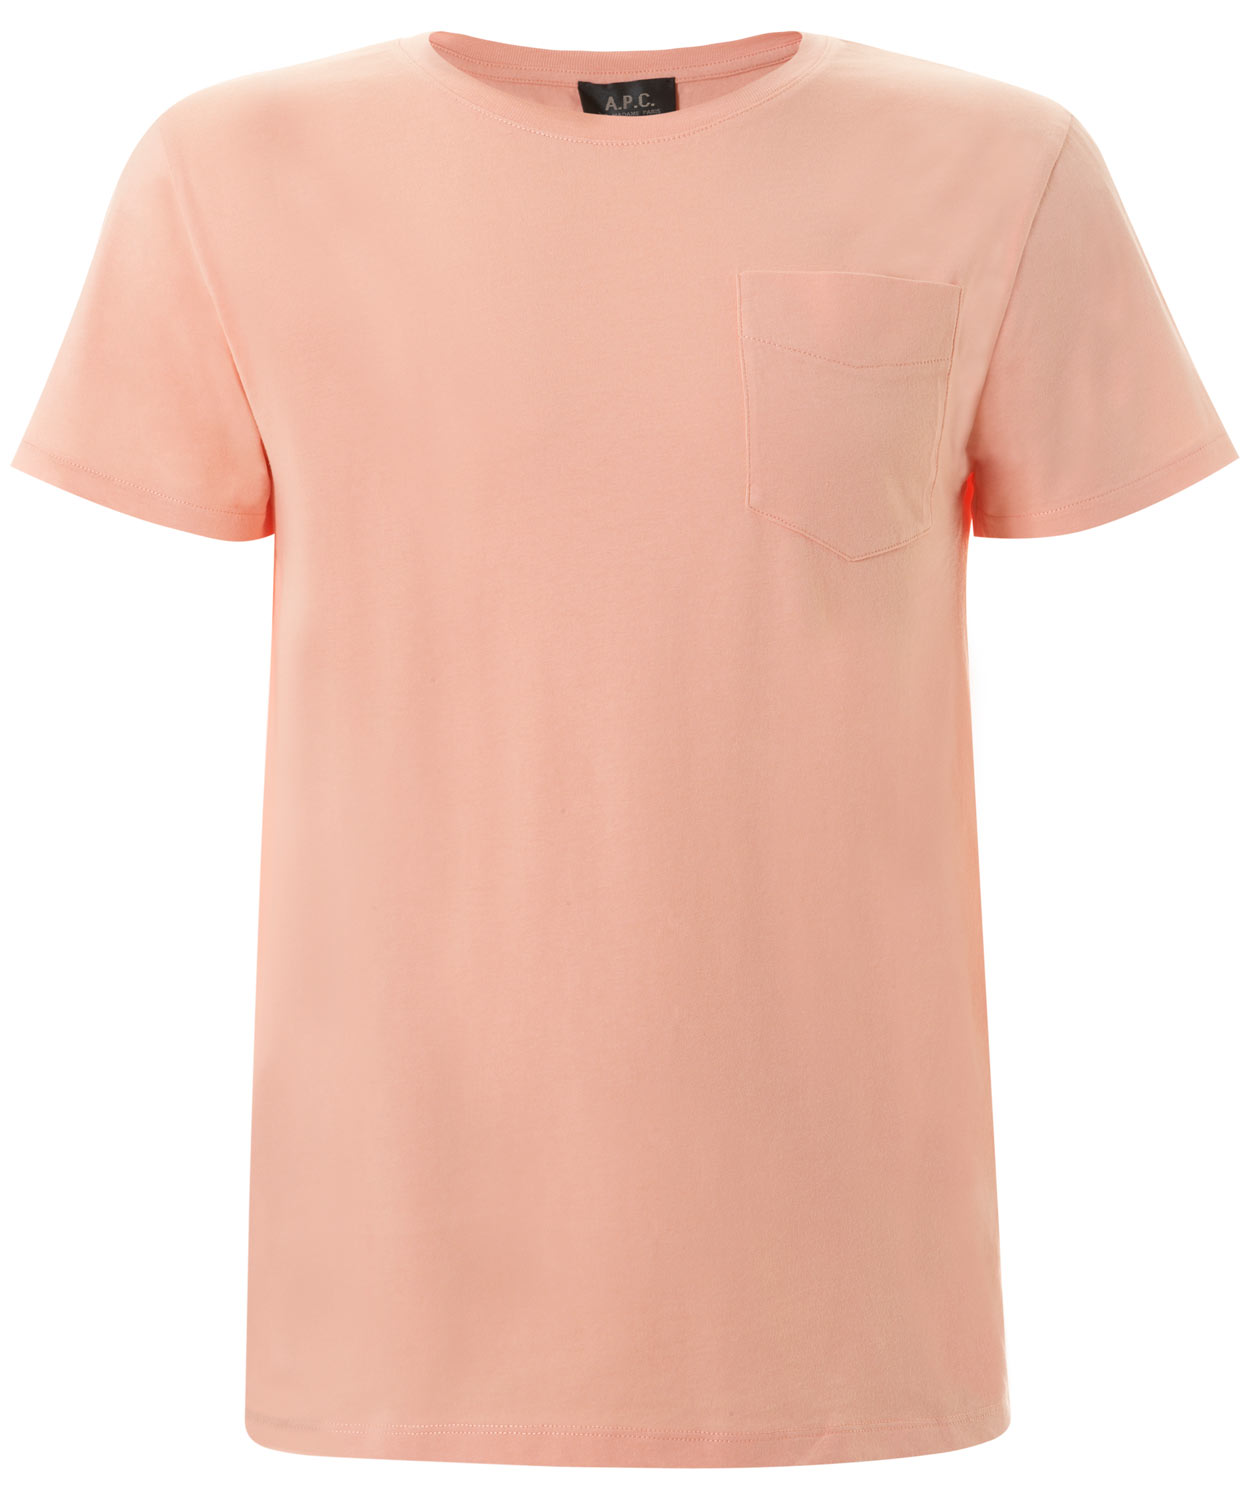 A.P.C. Pocket Front Cotton Tshirt in Pink for Men - Lyst